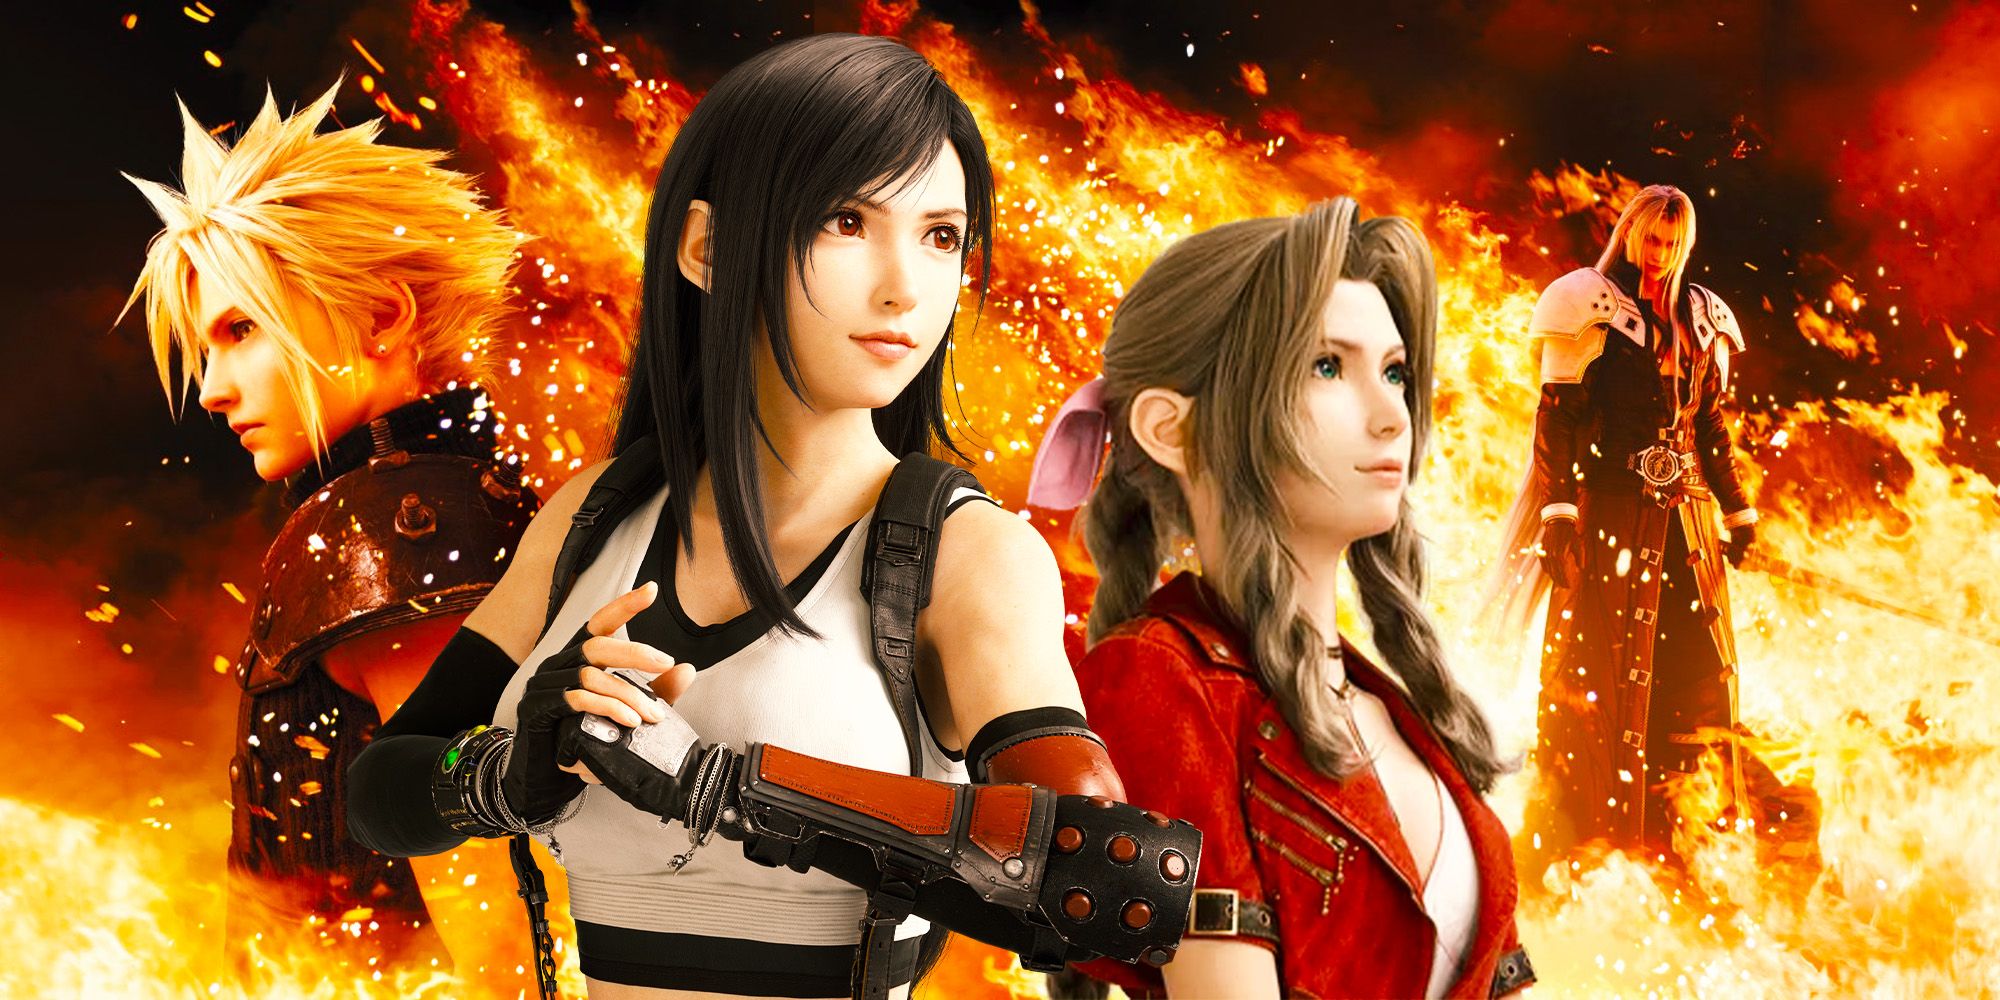 Tifa, Aerith, Cloud and Sephiroth from Final Fantasy VII Rebirth with fire raging in the background